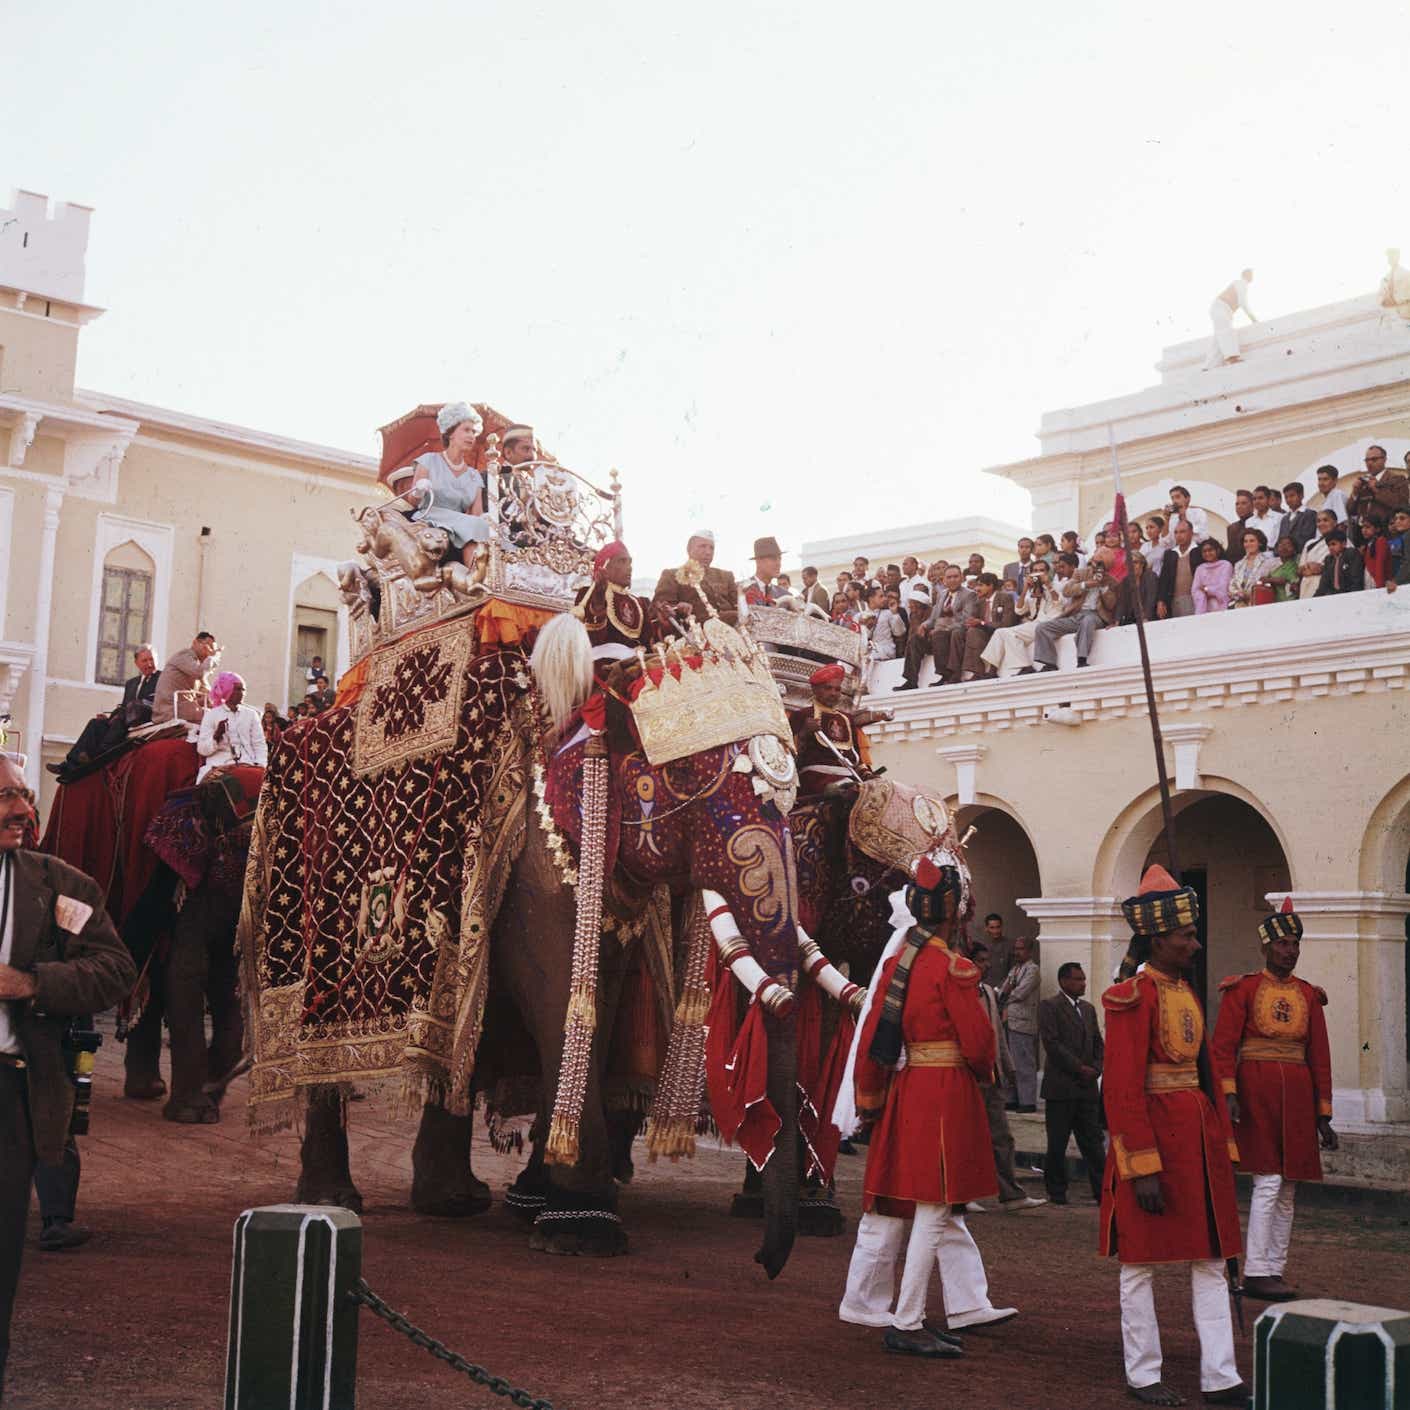 Queen Elizabeth II enjoys an elephant ride at Benares during a tour of India in 1961.